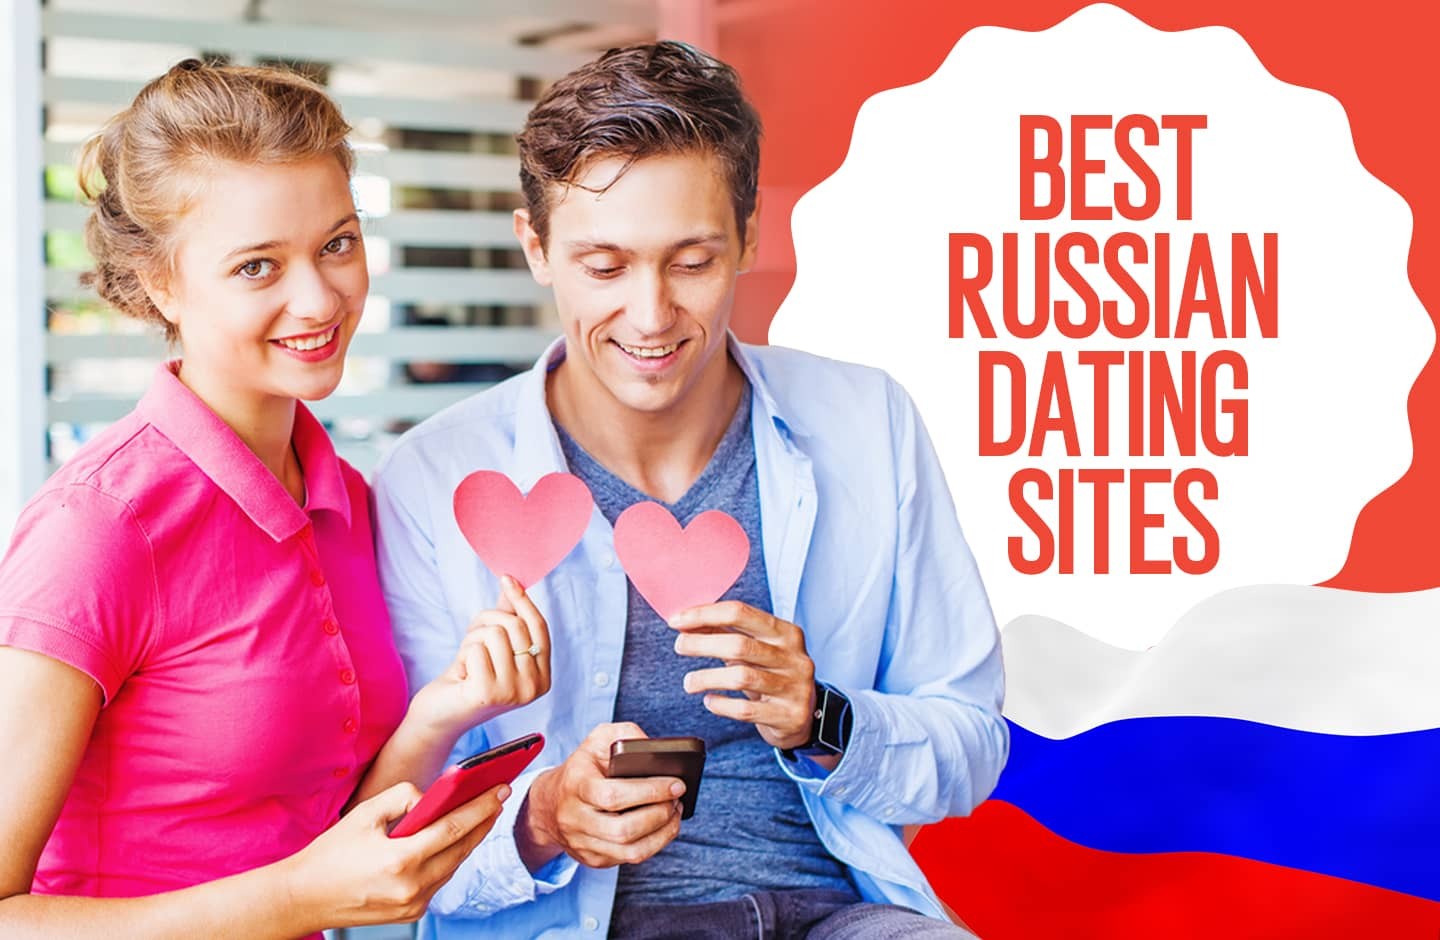 On Several Russian Dating